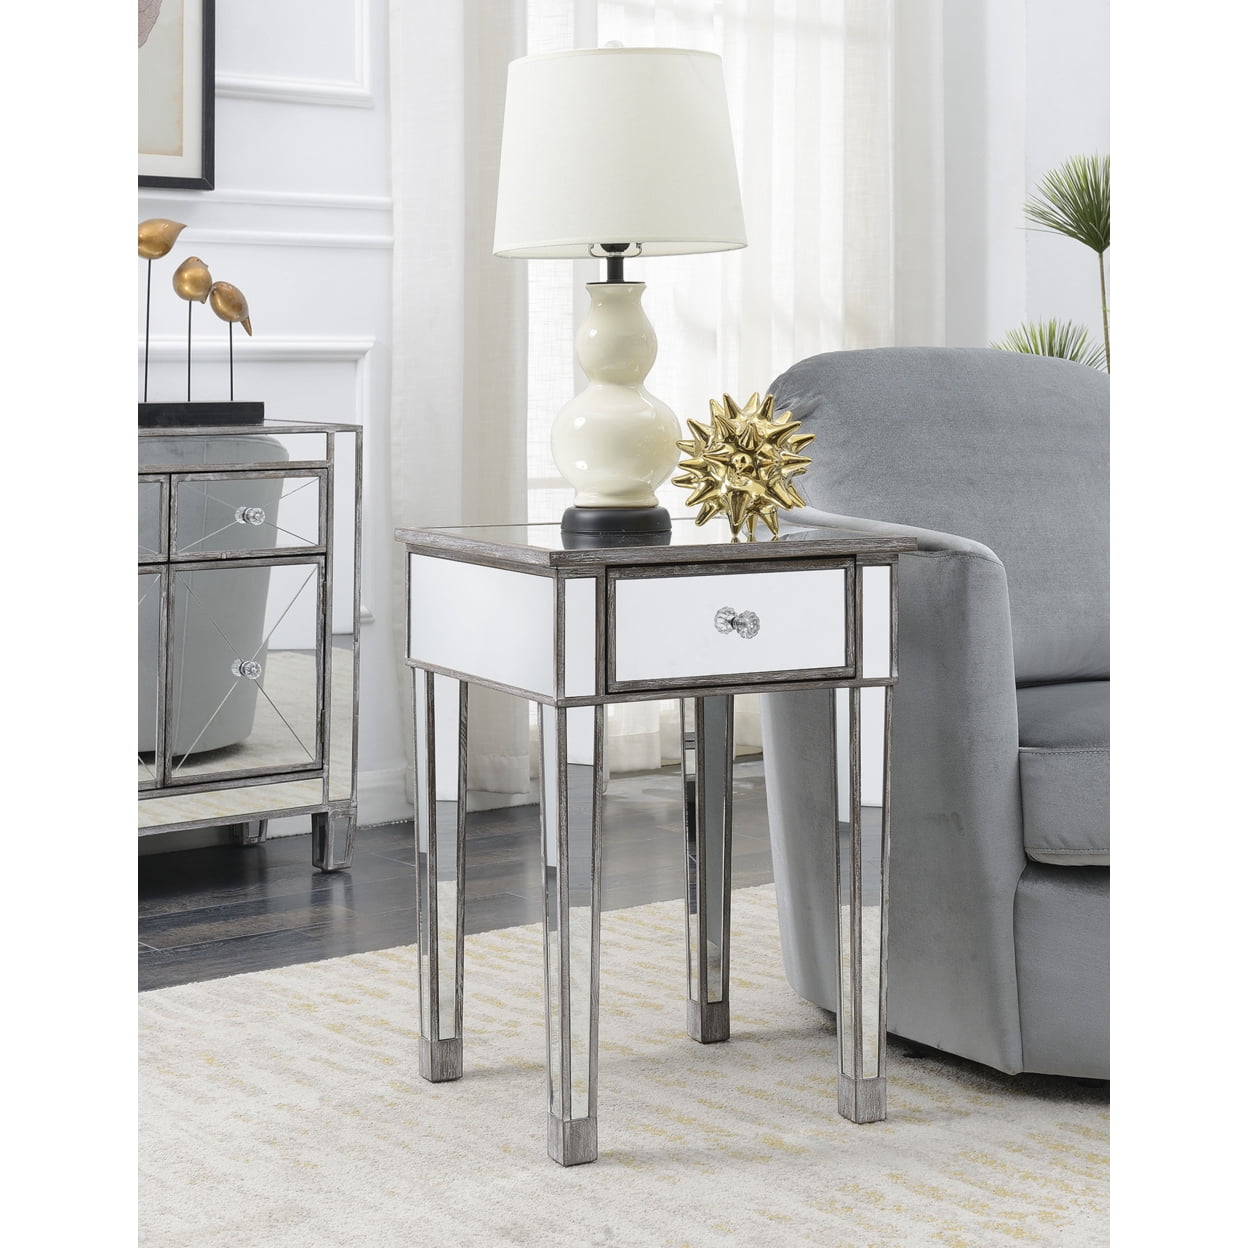 Picture of Convenience Concepts 413345WGY Gold Coast Mirrored End Table with Drawer - Weathered Gray